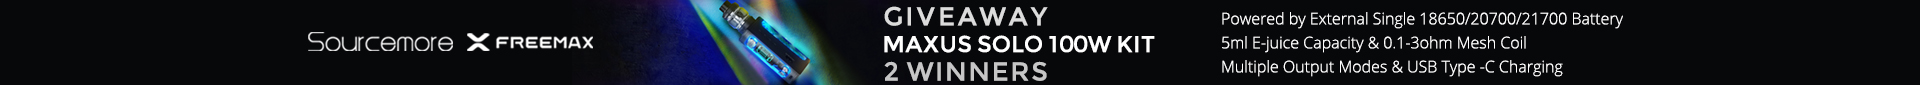 Sourcemore and Freemax Maxus Solo 100W Kit Giveaway